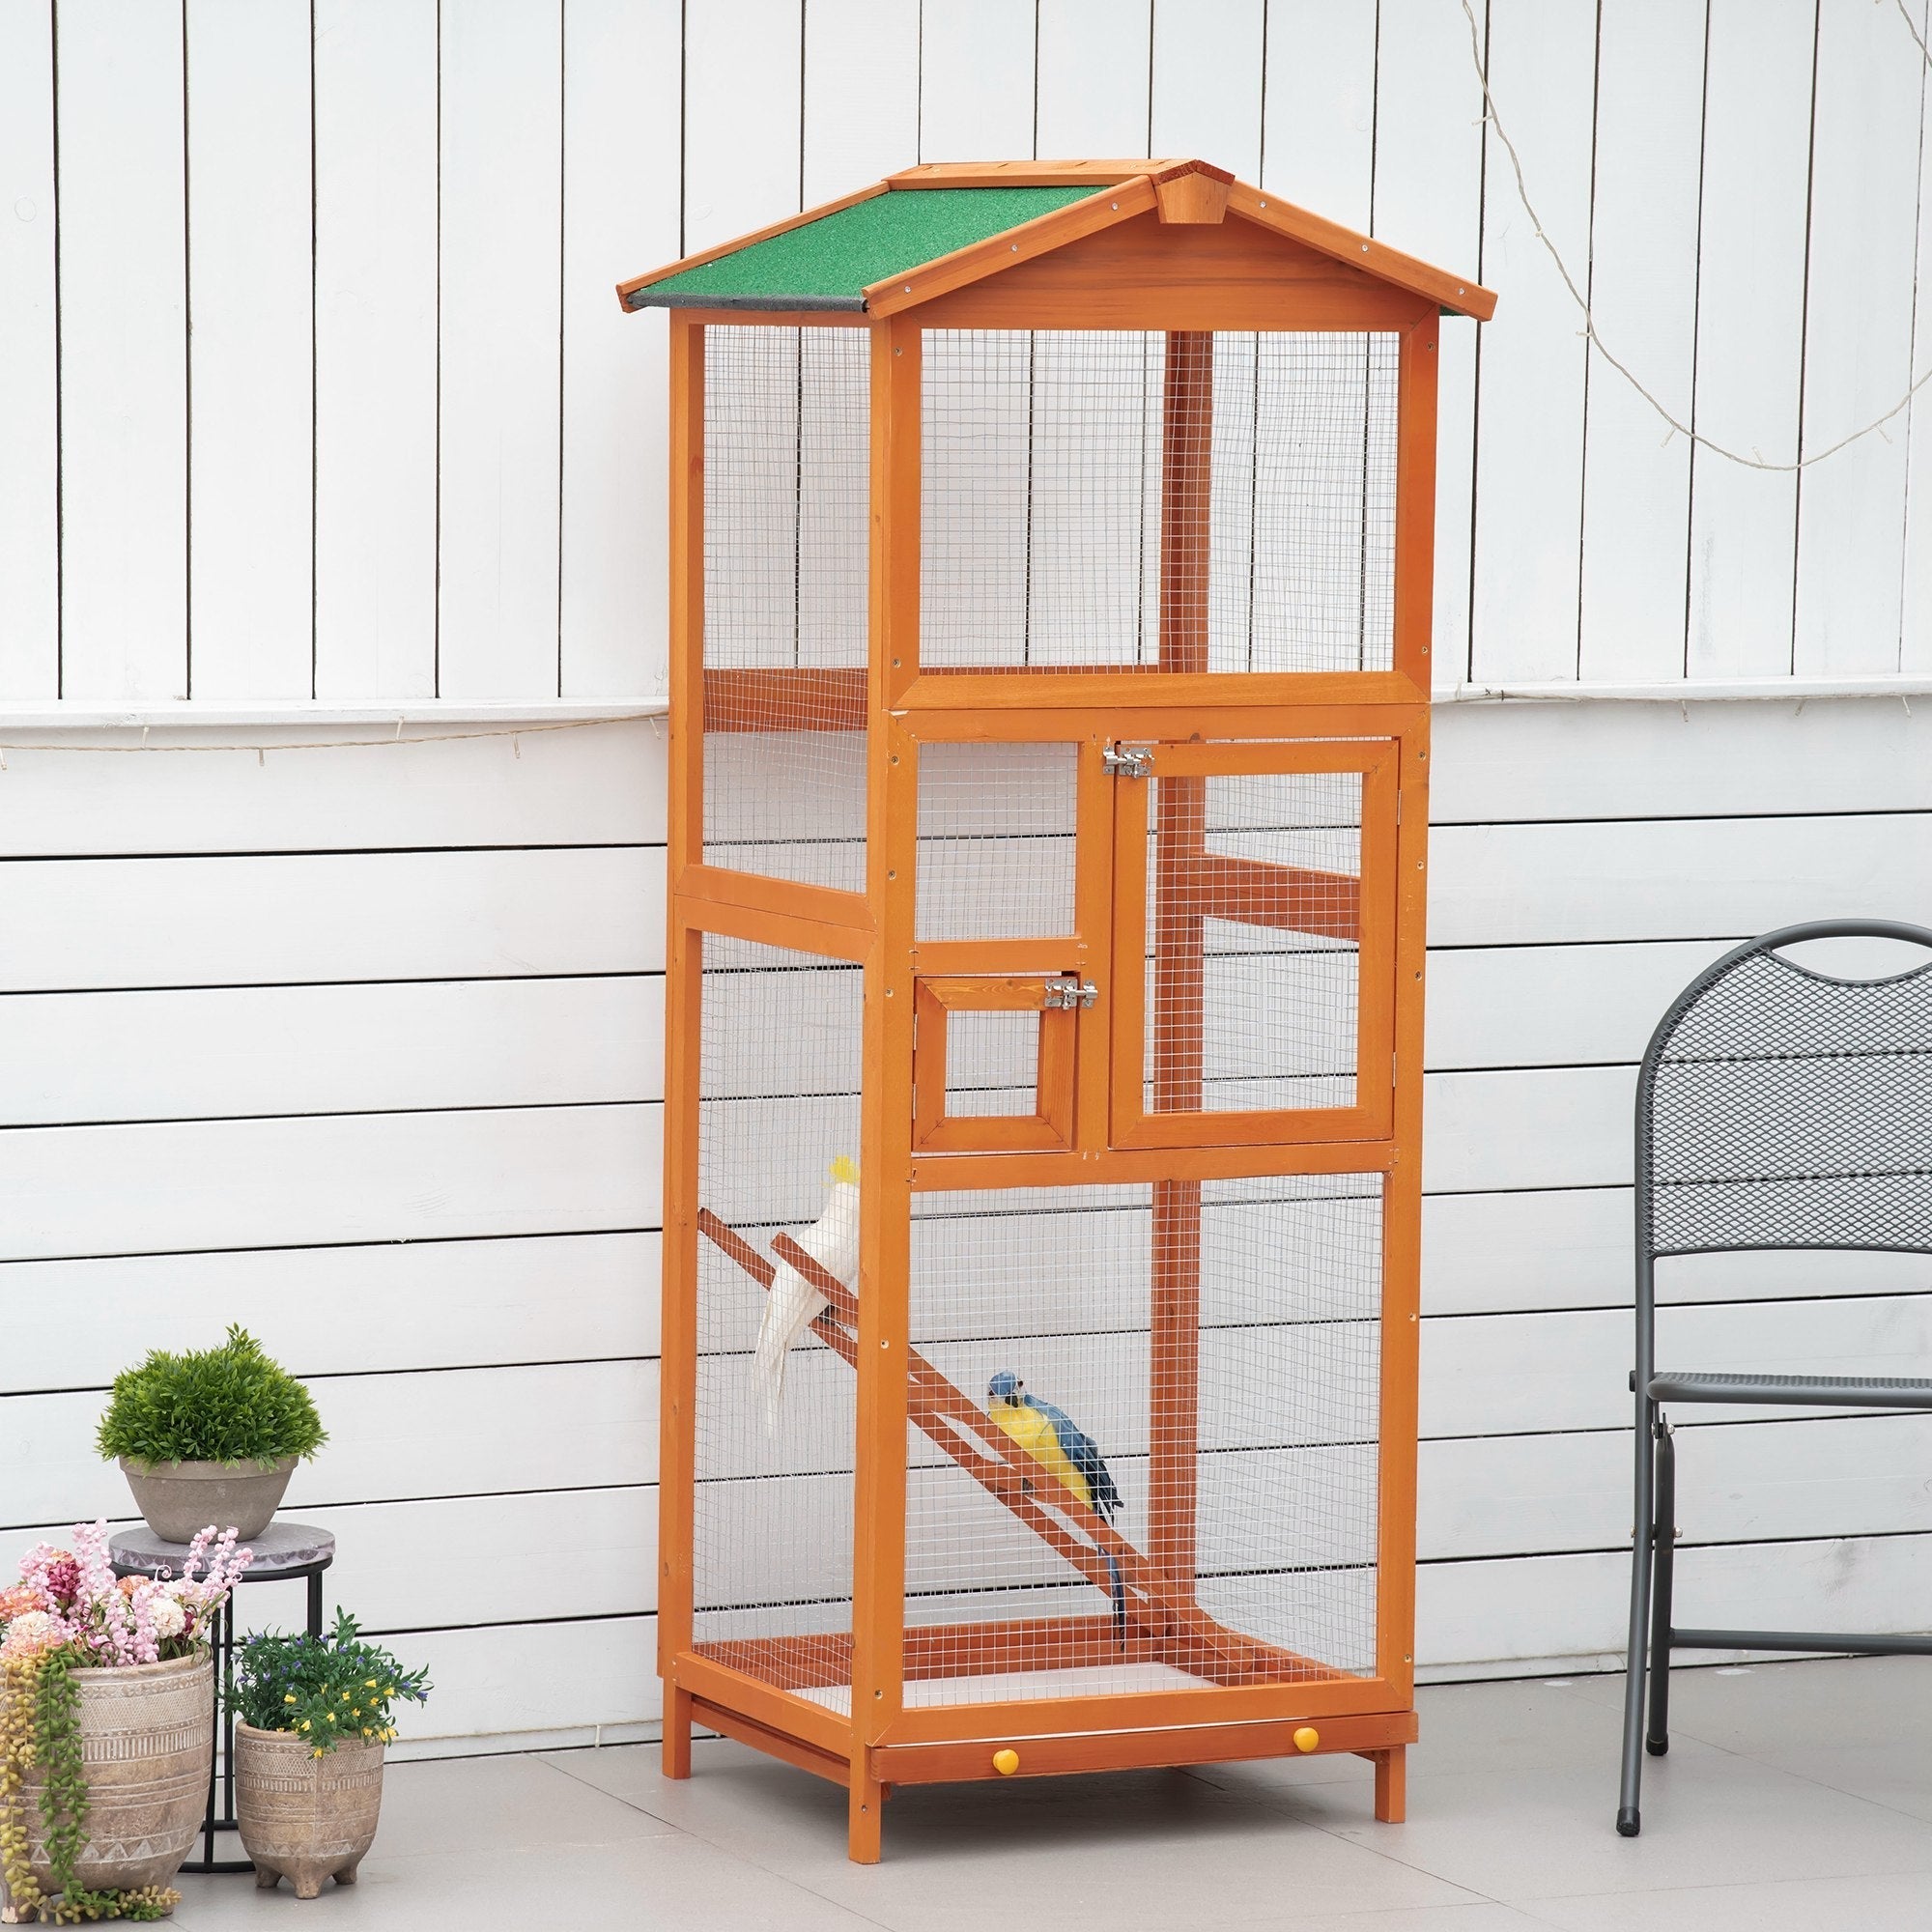 Spacious Outdoor Wooden Bird Aviary with Easy-Clean Tray, PawHut,